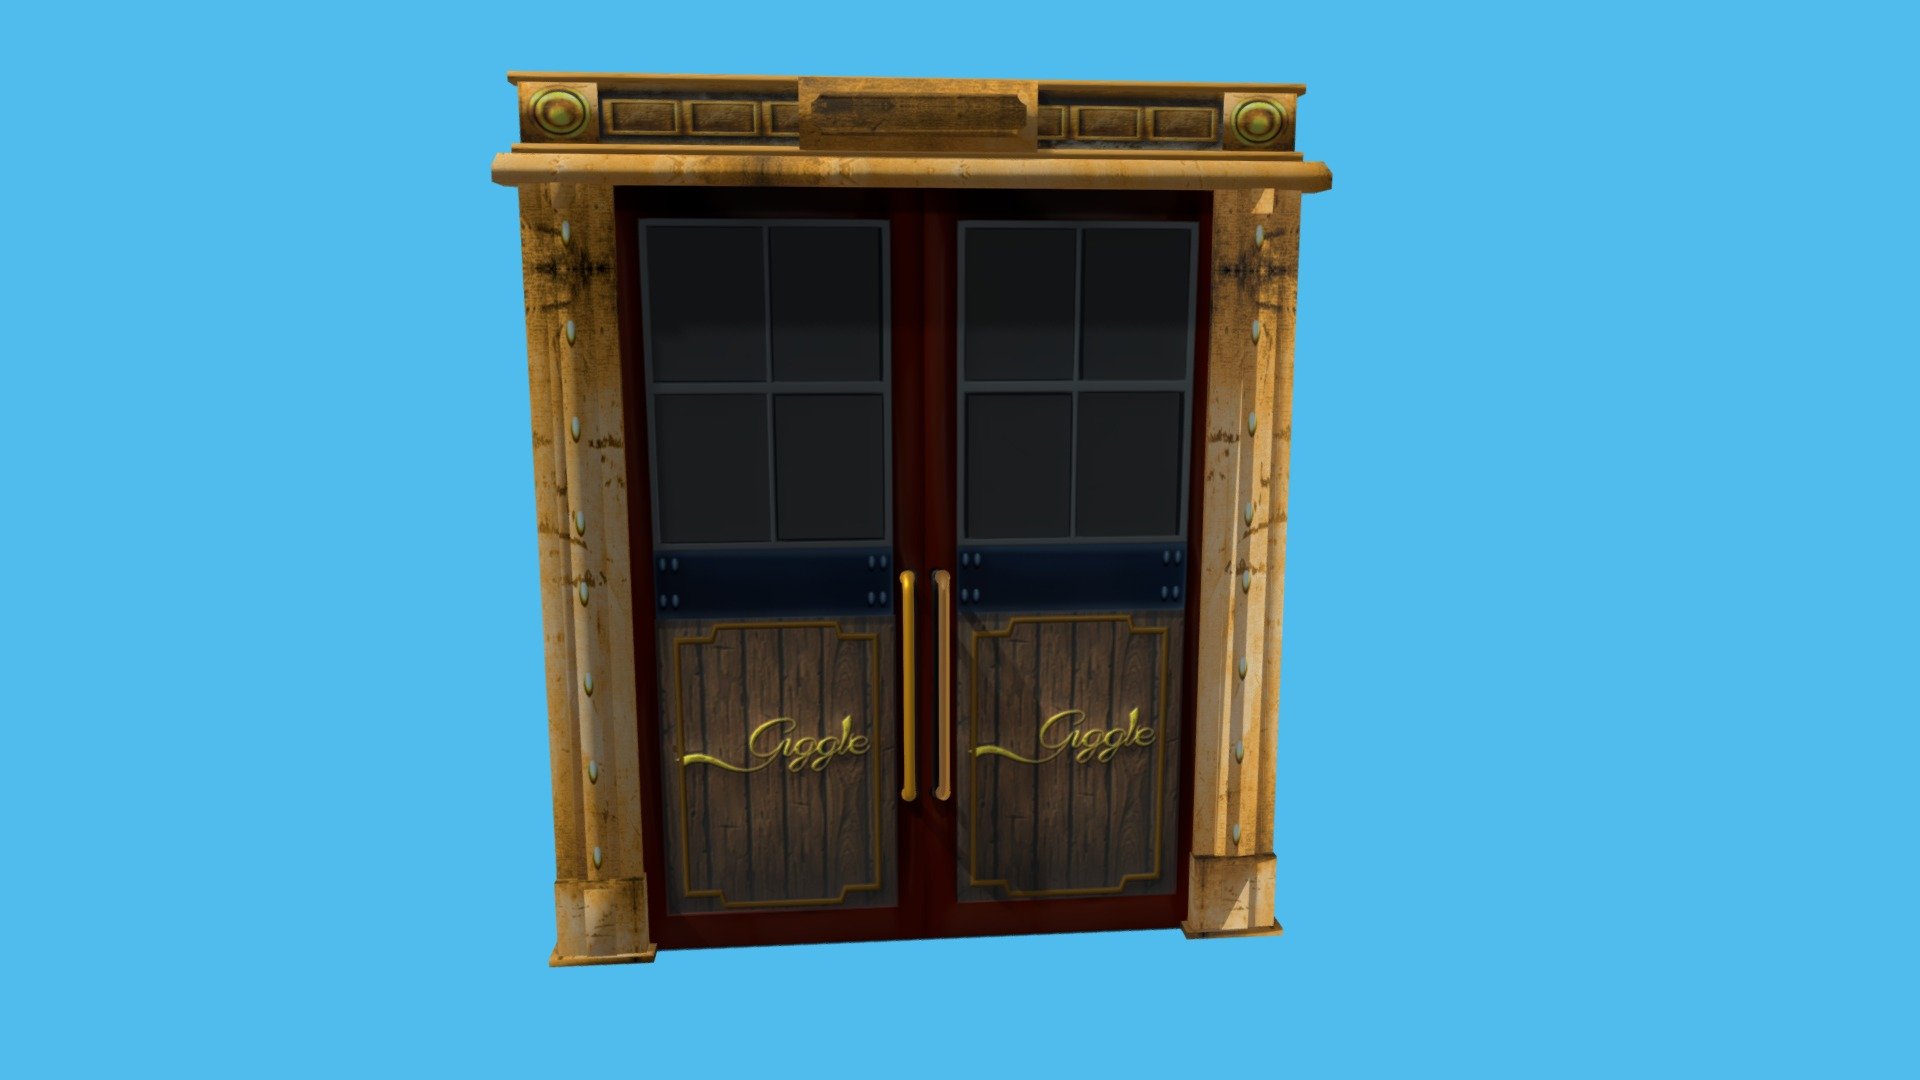 A low-poly, stylized door for the toy factory stage in a VR project I have been working on. Digitally painted textures made in Photoshop; modeled in 3DS Max 3d model